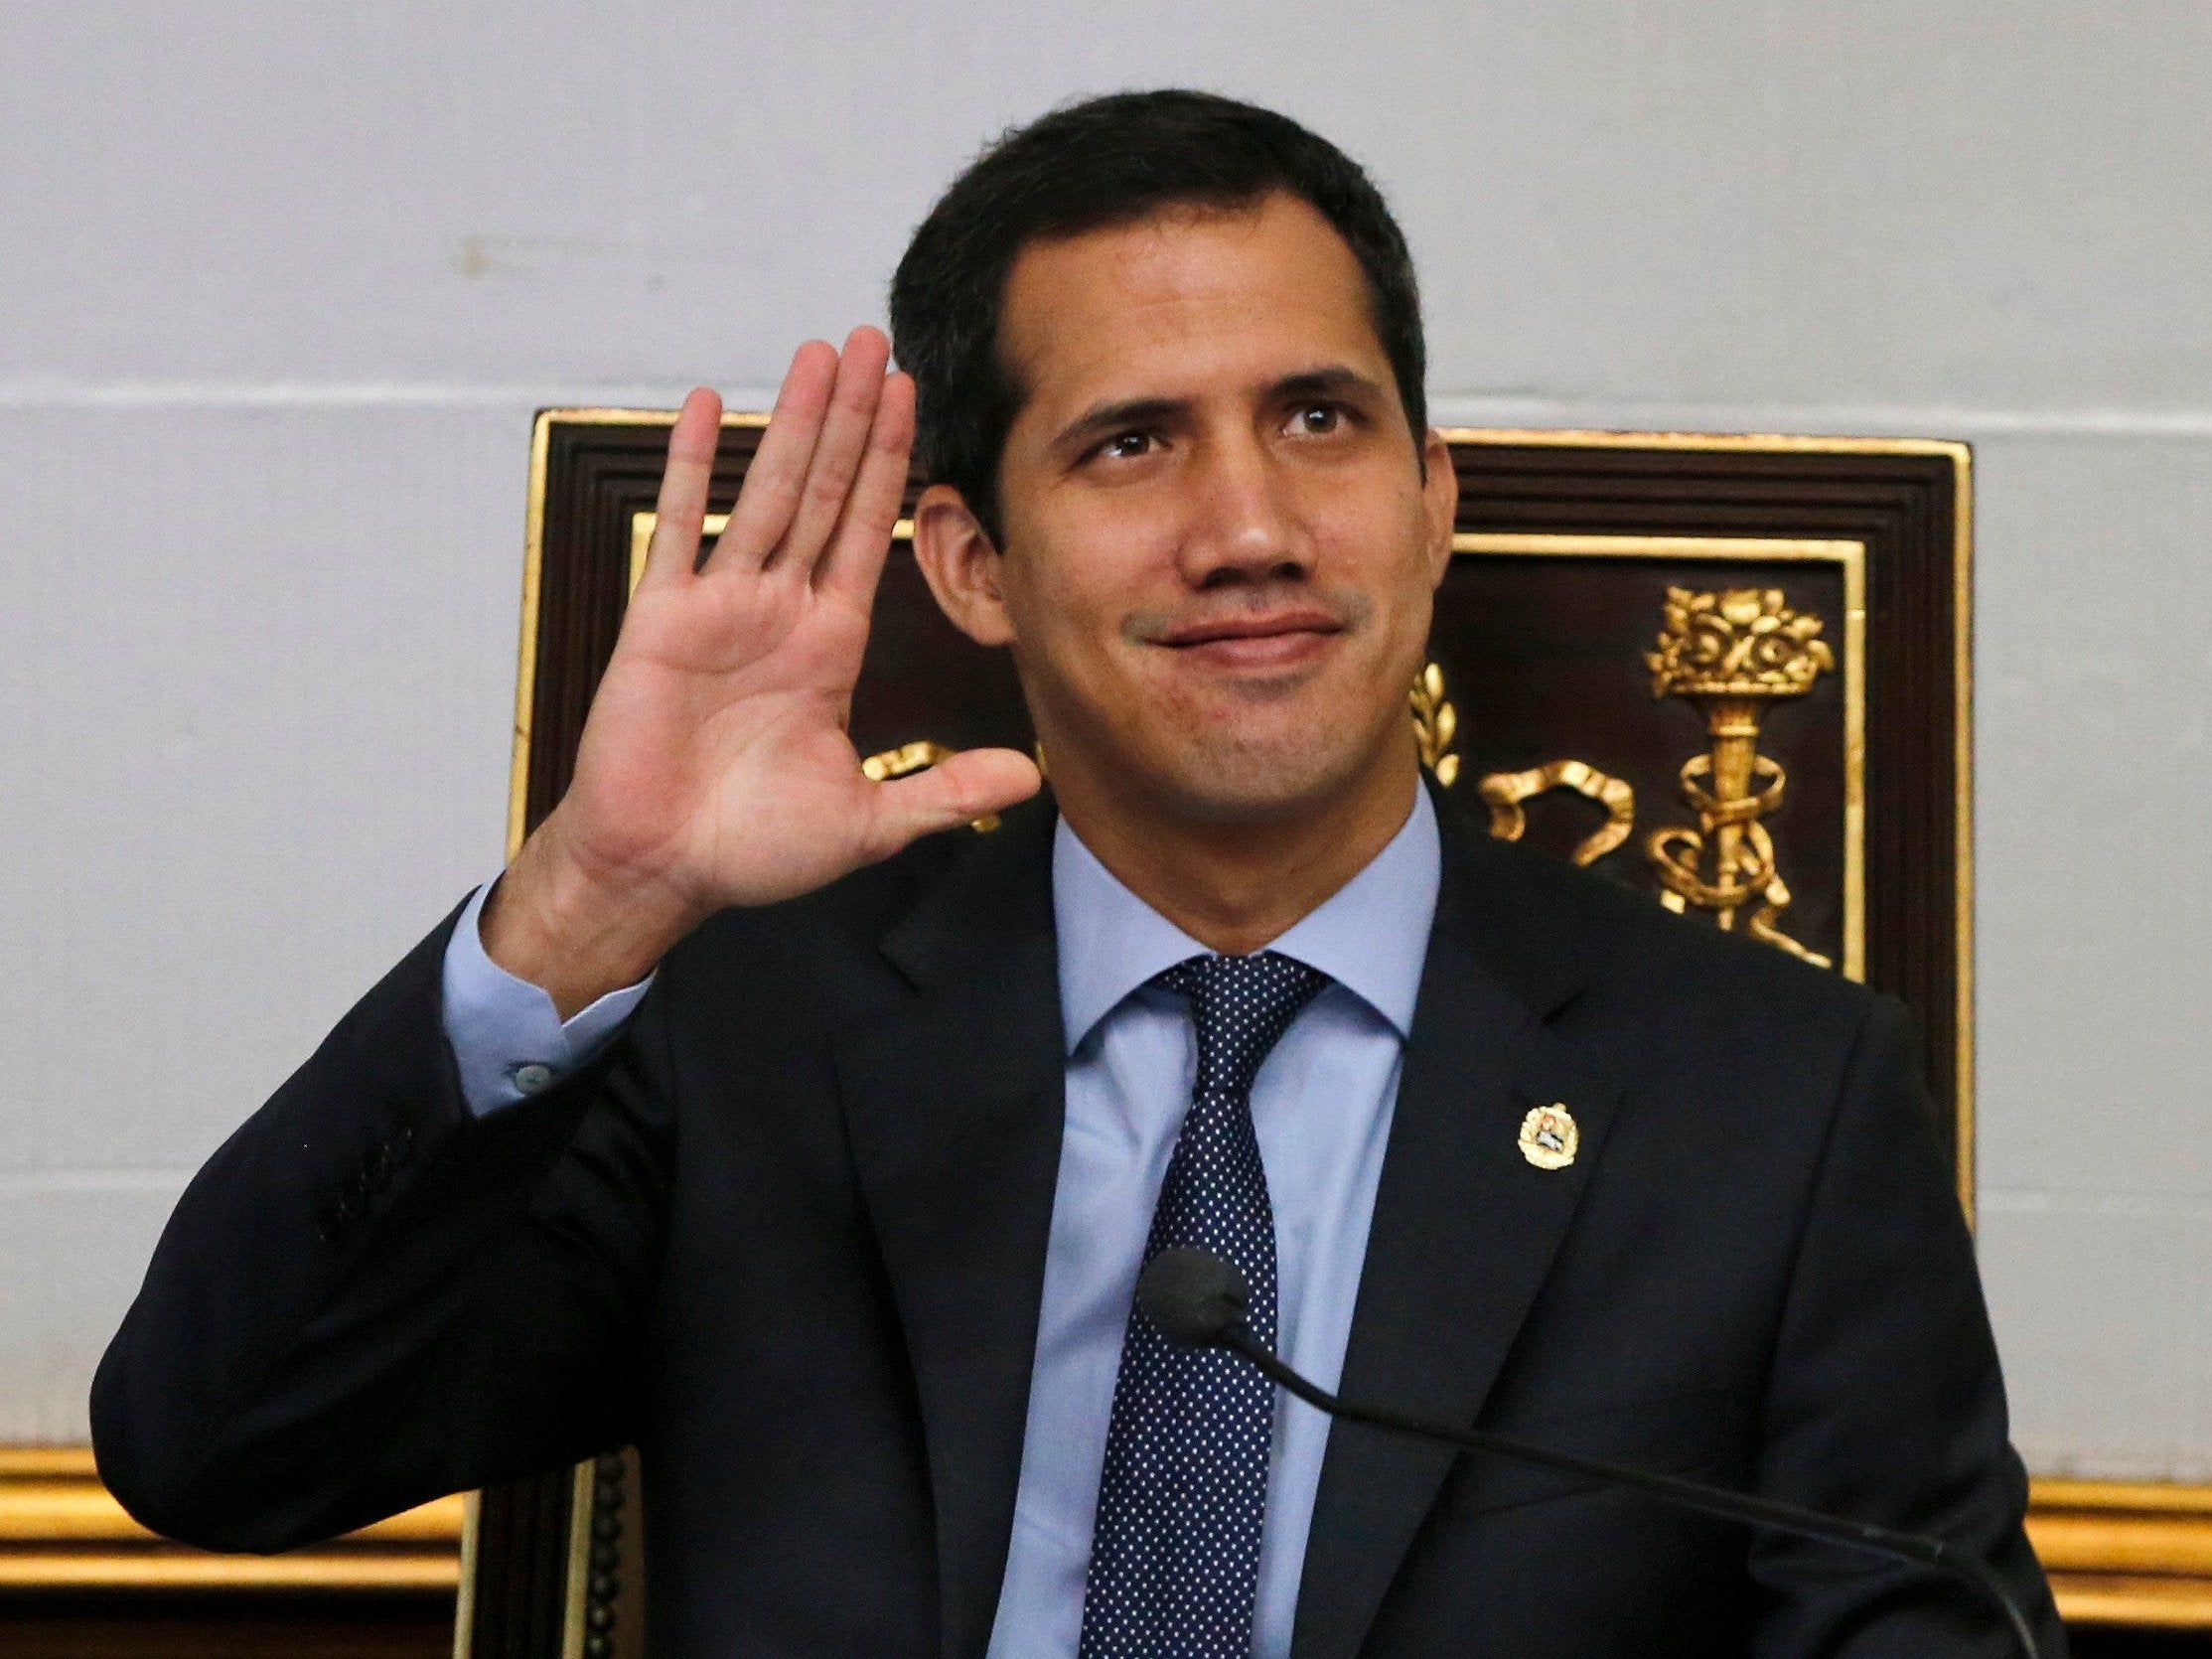 Venezuela's opposition leader Juan Guaido stripped of parliamentary immunity, allowing potential arrest